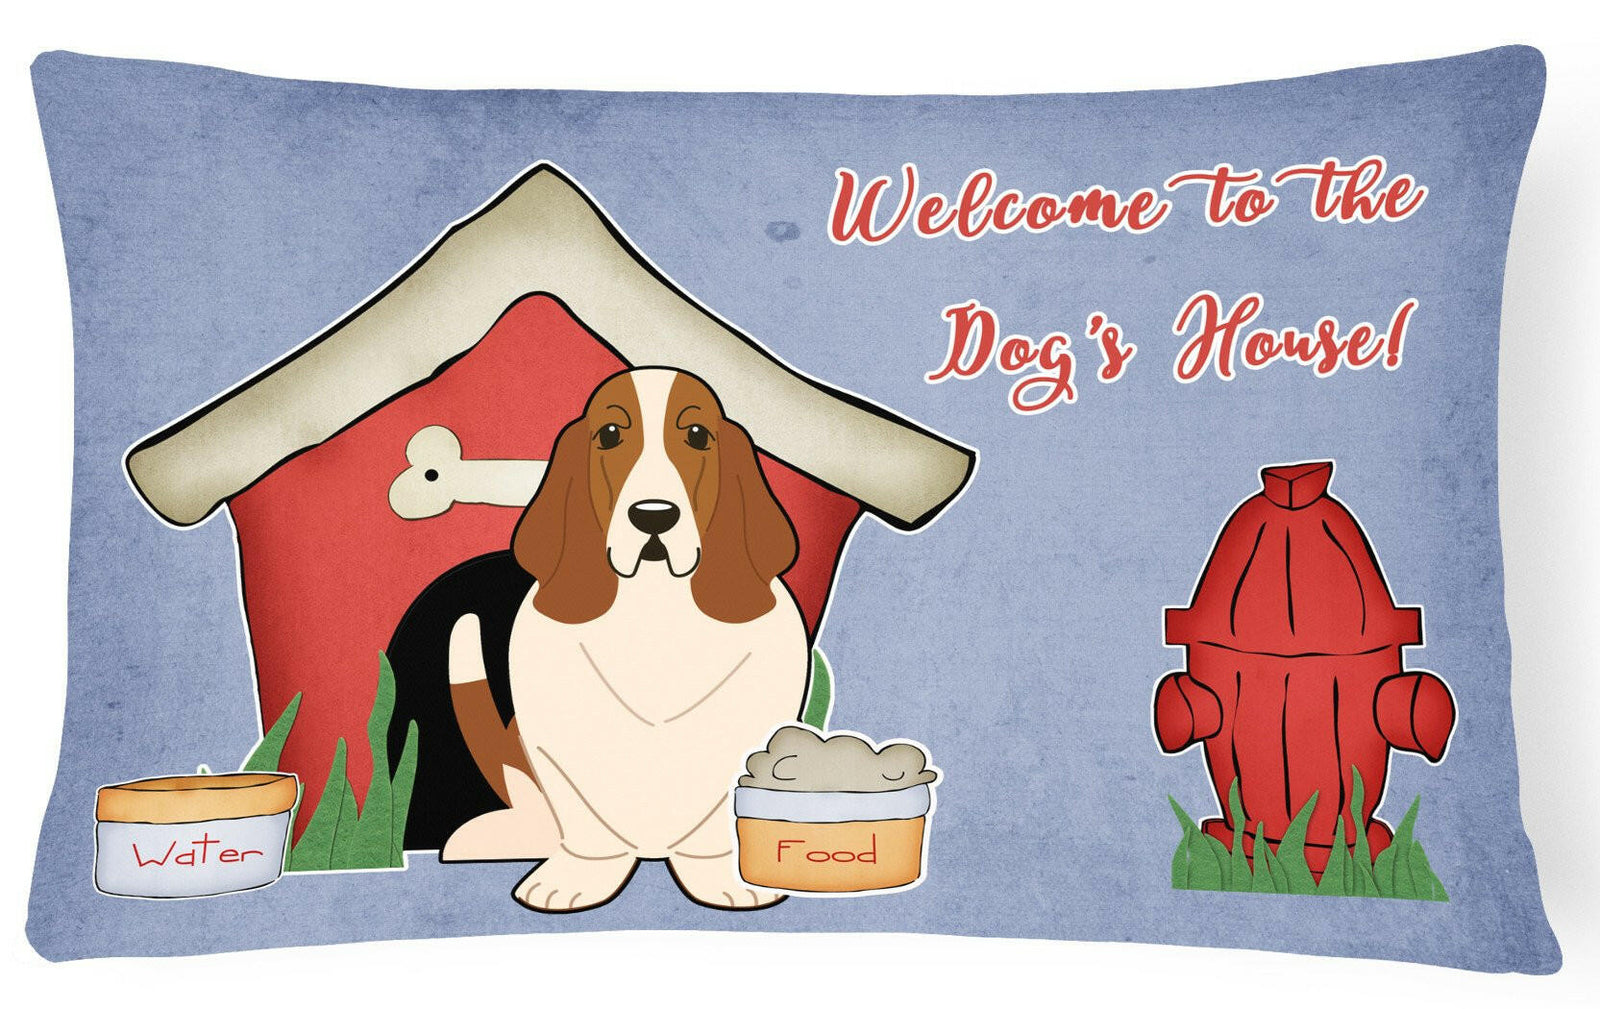 Dog House Collection Basset Hound Canvas Fabric Decorative Pillow BB2775PW1216 by Caroline's Treasures